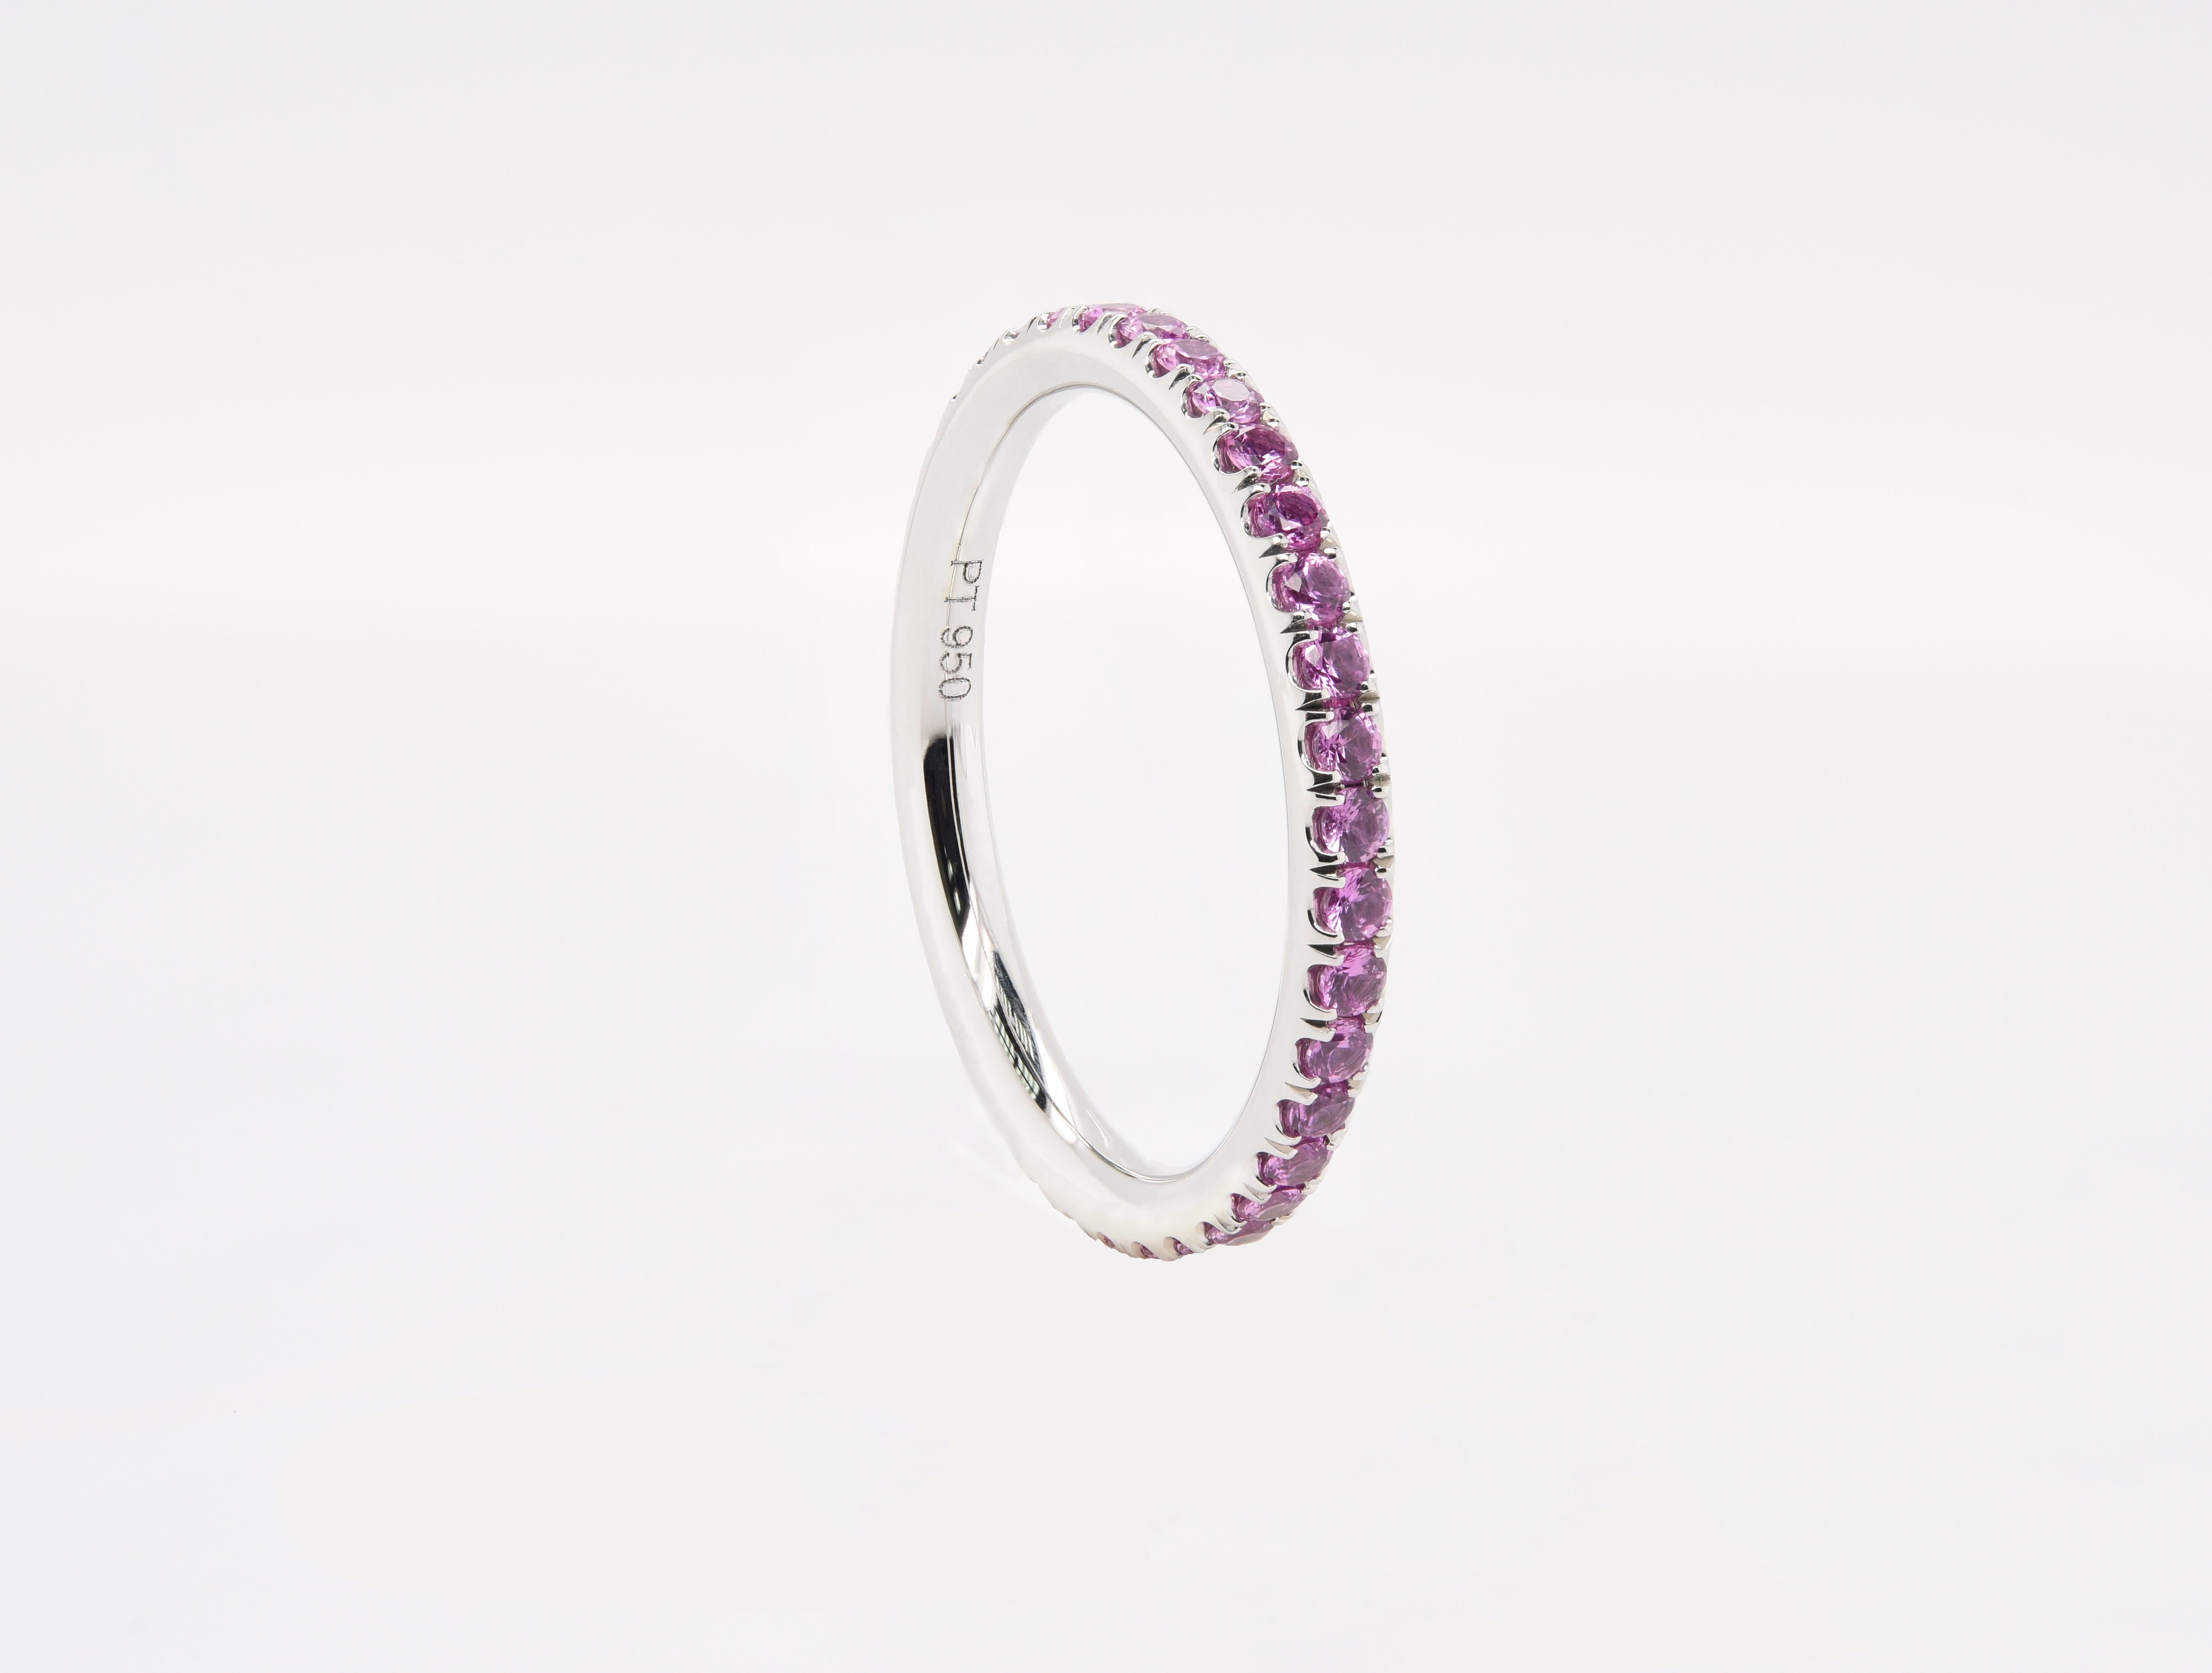 JAG New York Eternity Band with Your Choice of Diamonds and Gemstones For Sale 1